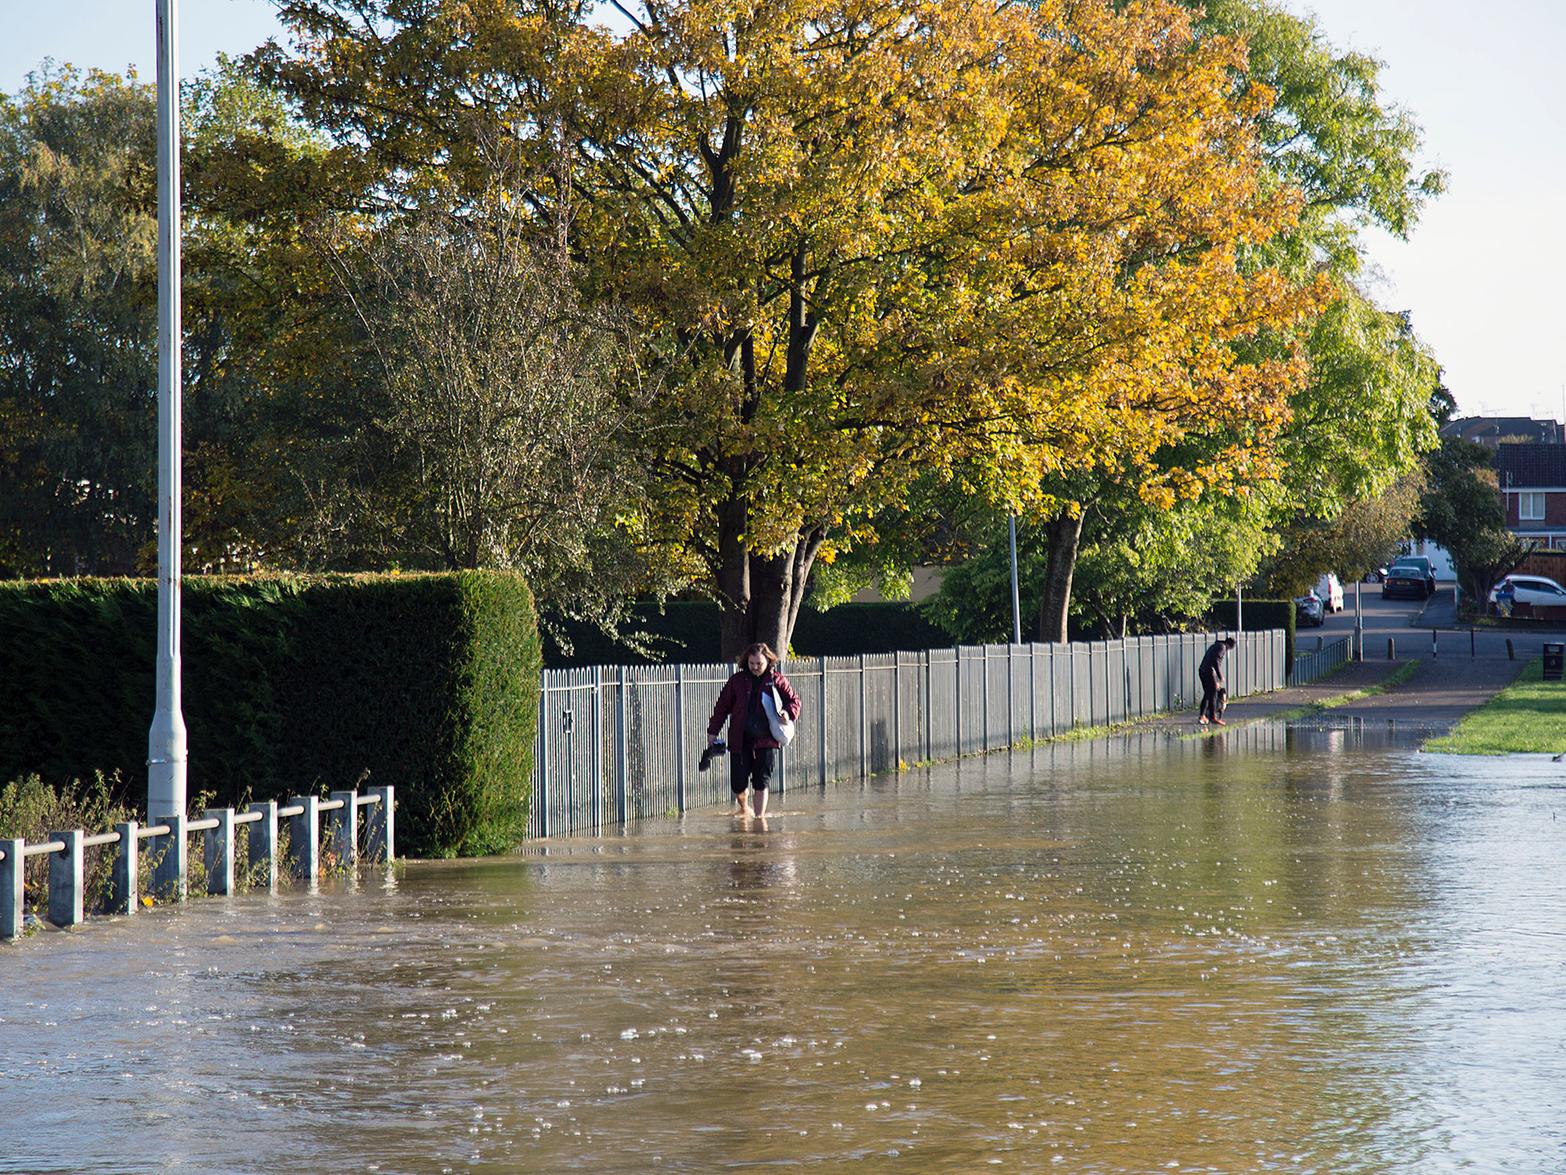 The River Ise flooded and turned pathways into waterways near Kettering's skate park this Sunday.